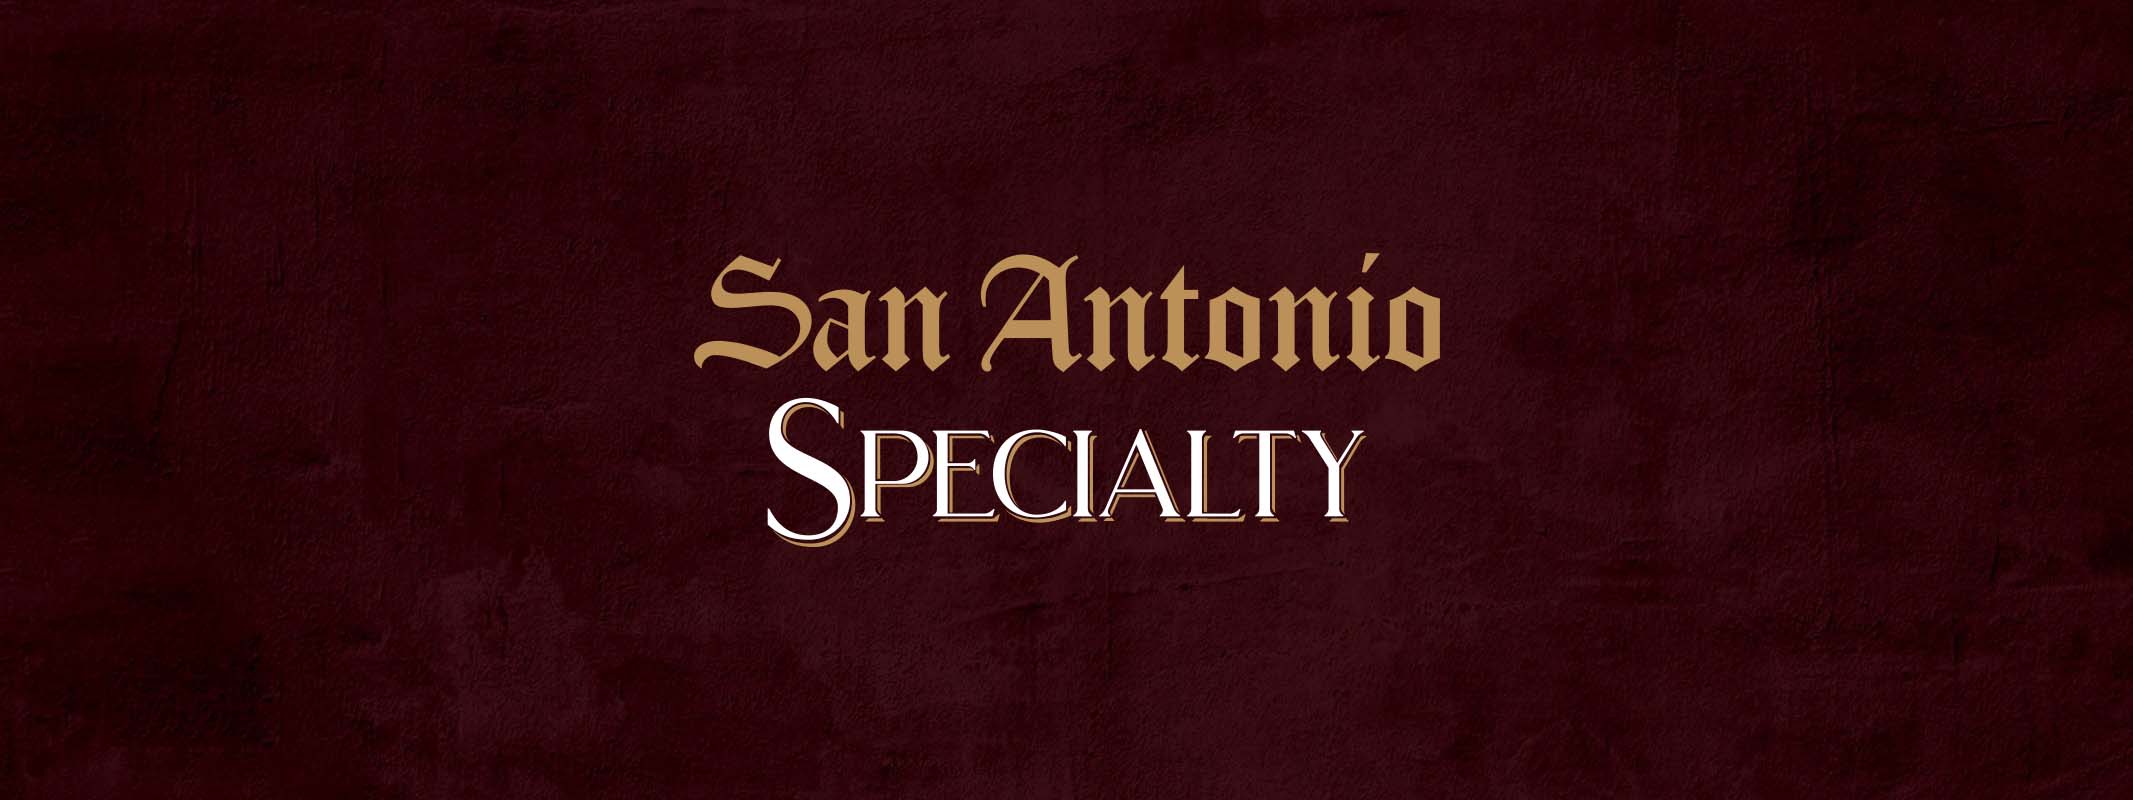 San Antonio Specialty superimposed onto a textured red background 